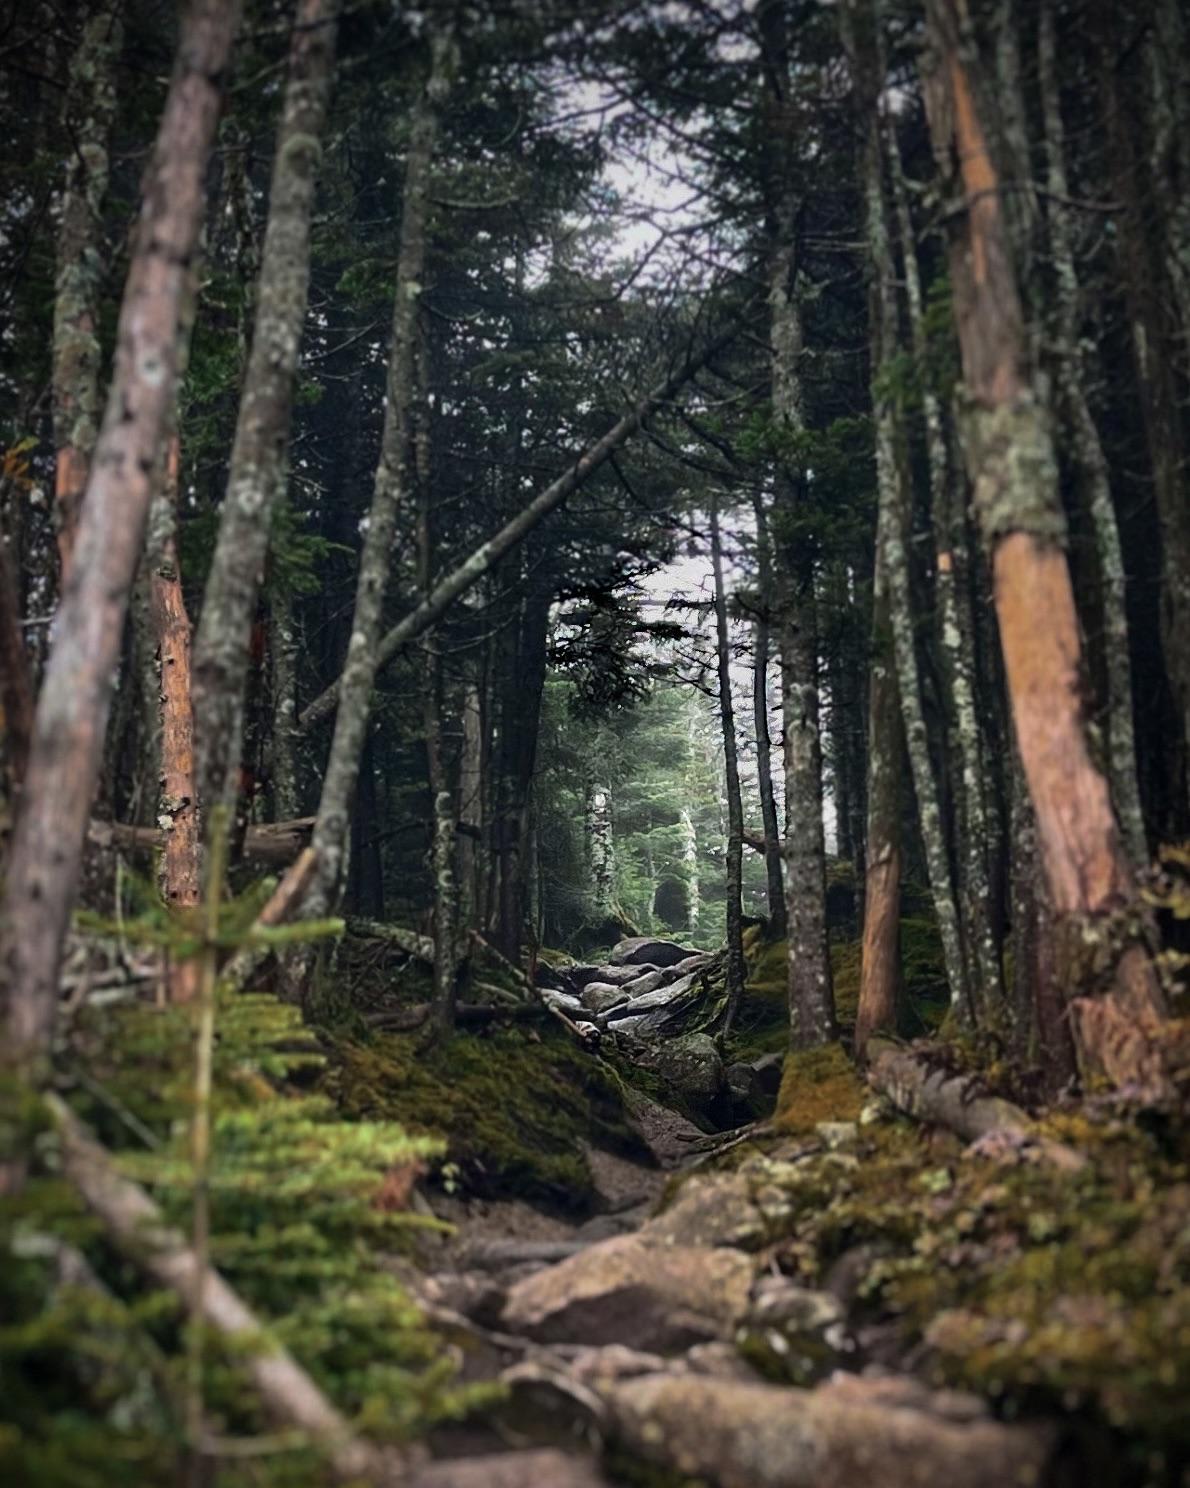 Kinsman Trail, which runs on the Appalachian Trail, is another great example of the rugged and moody beauty of The White Mountains in New Hampshire.